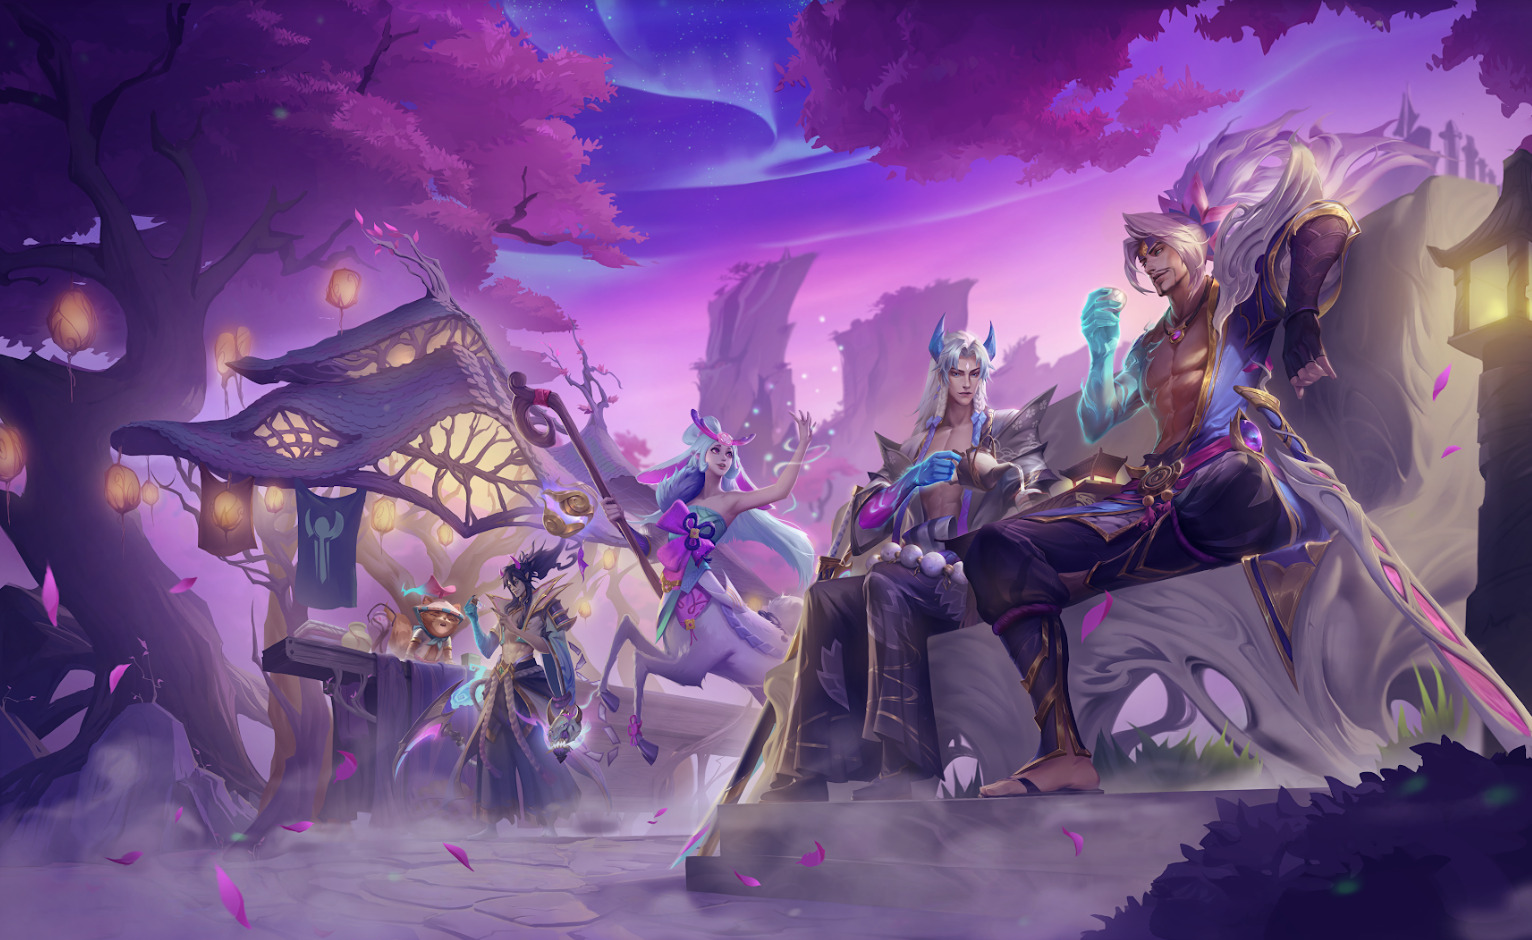 LoL Wild Rift Patch 3.5b: The last patch of 2022 brings in new skins, events, and a new champion Lillia